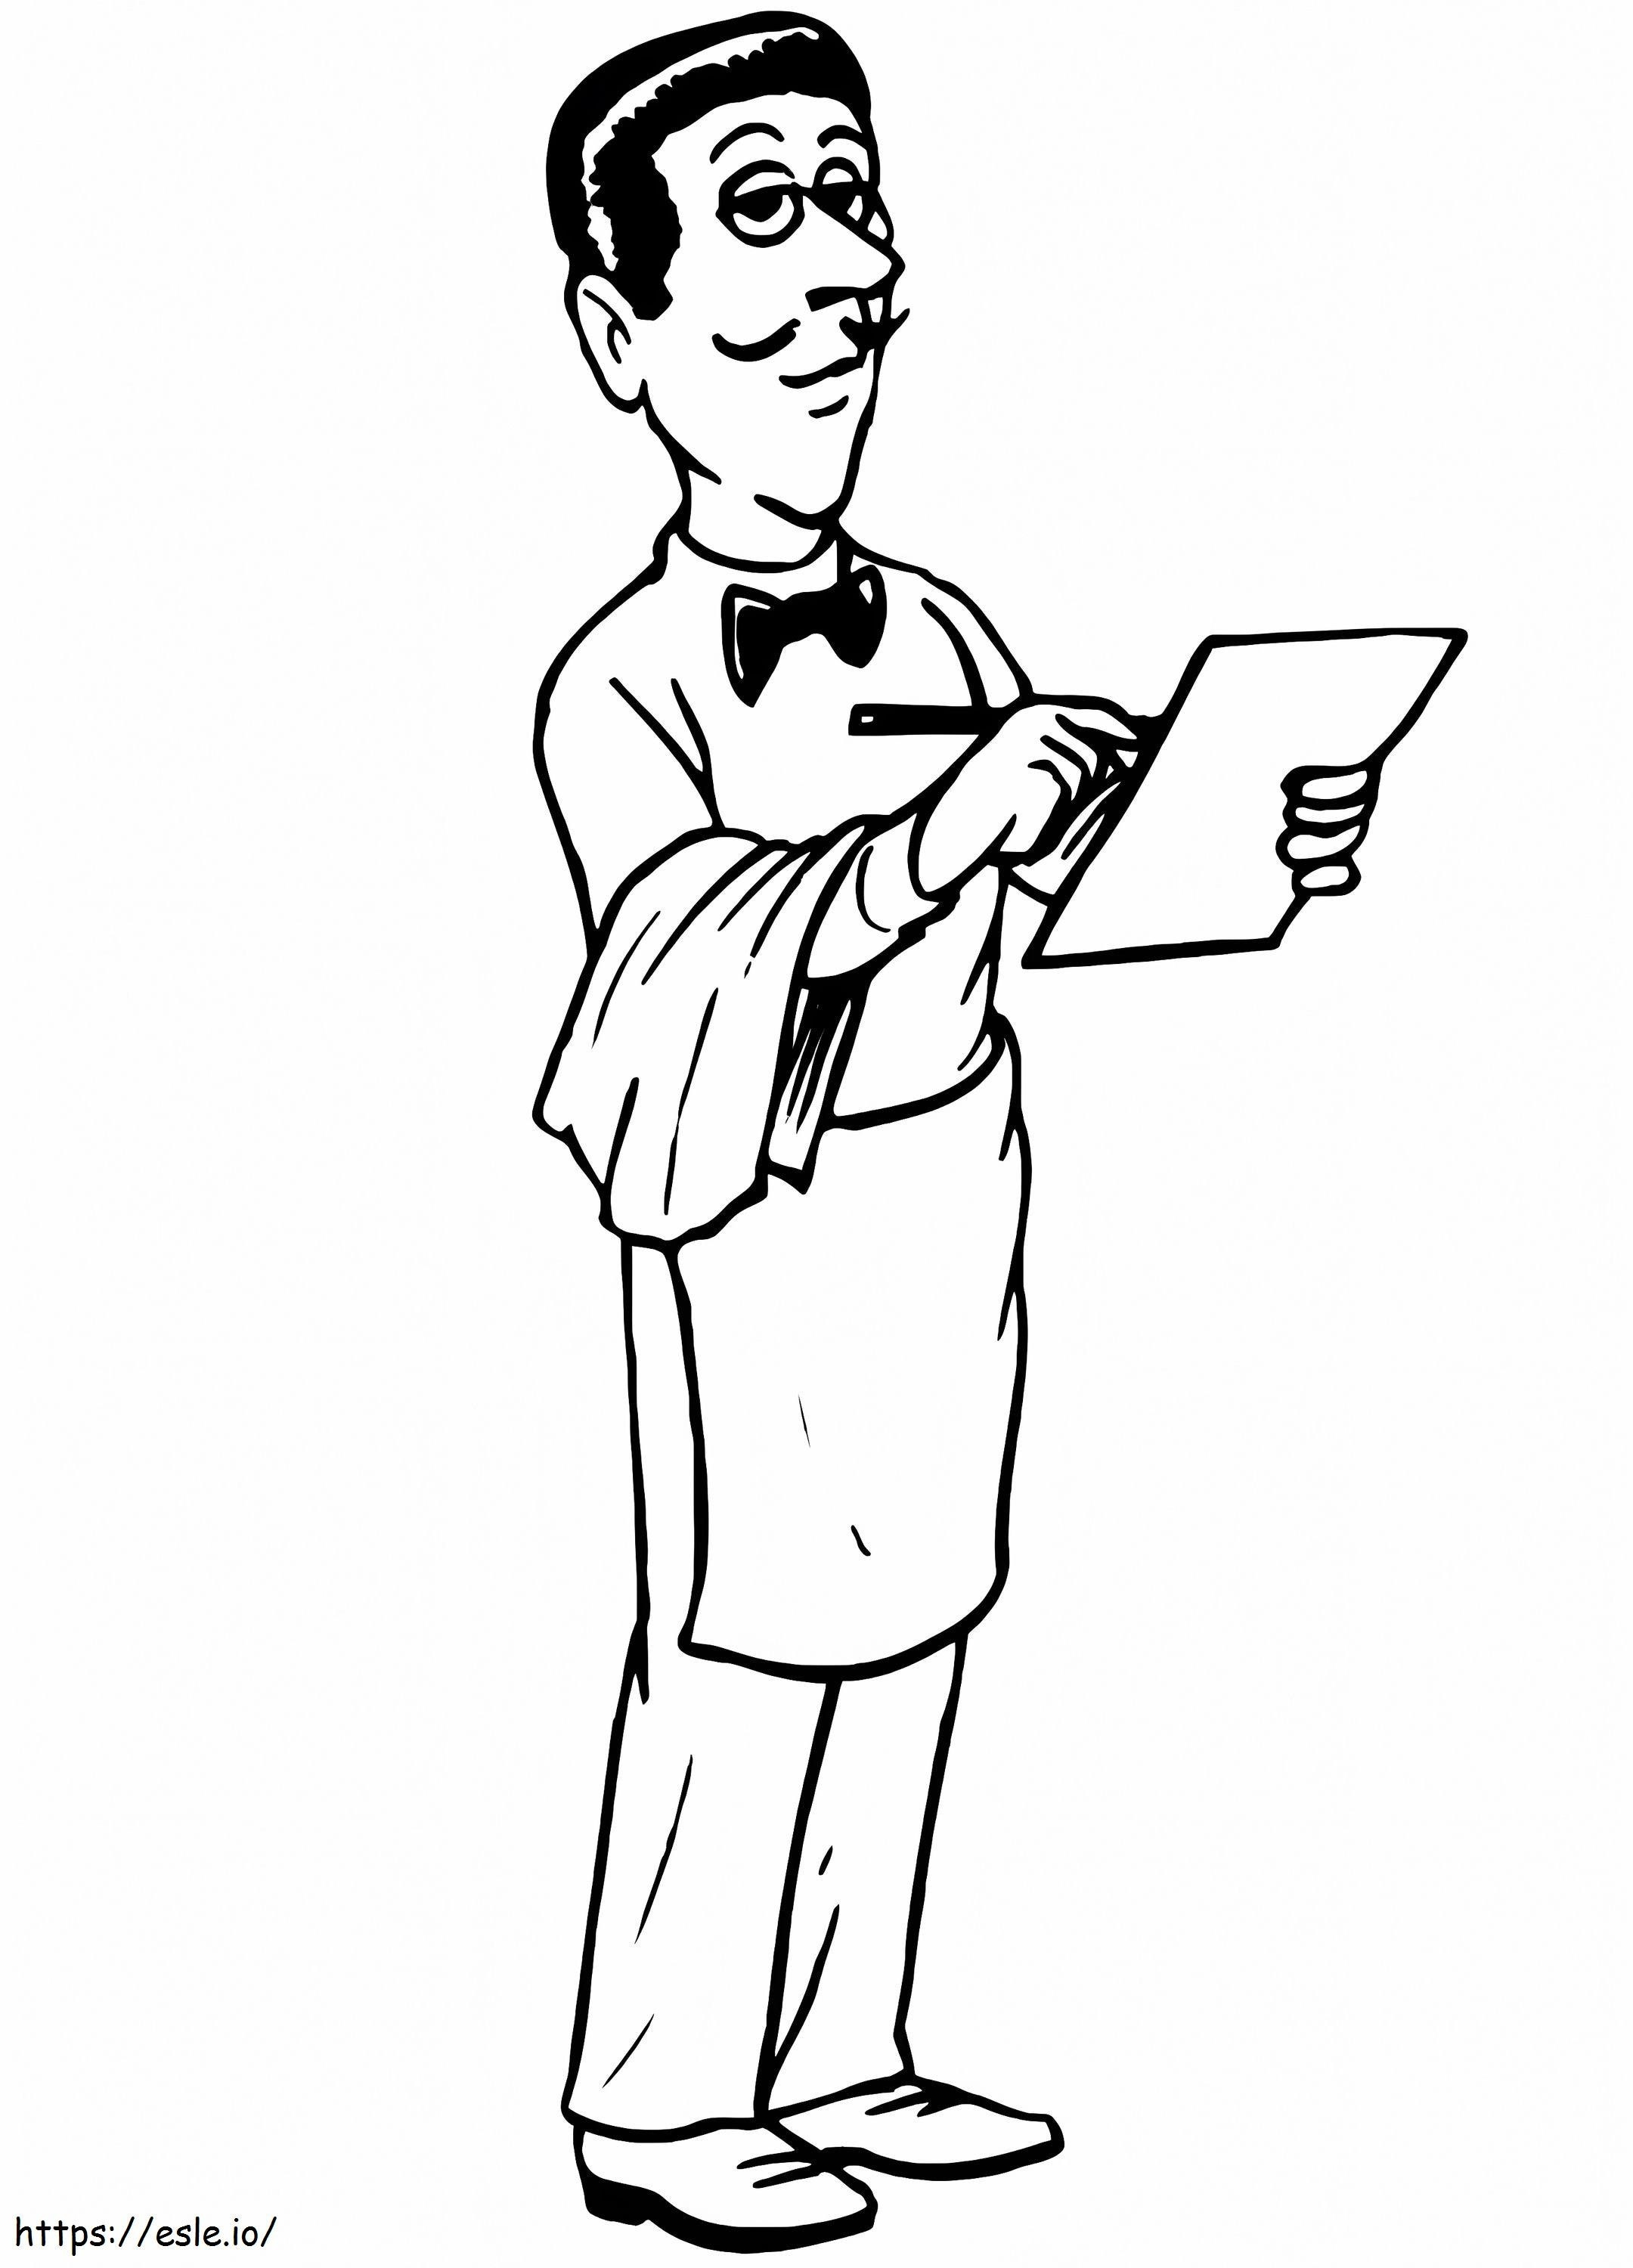 Waiter With Orders List coloring page